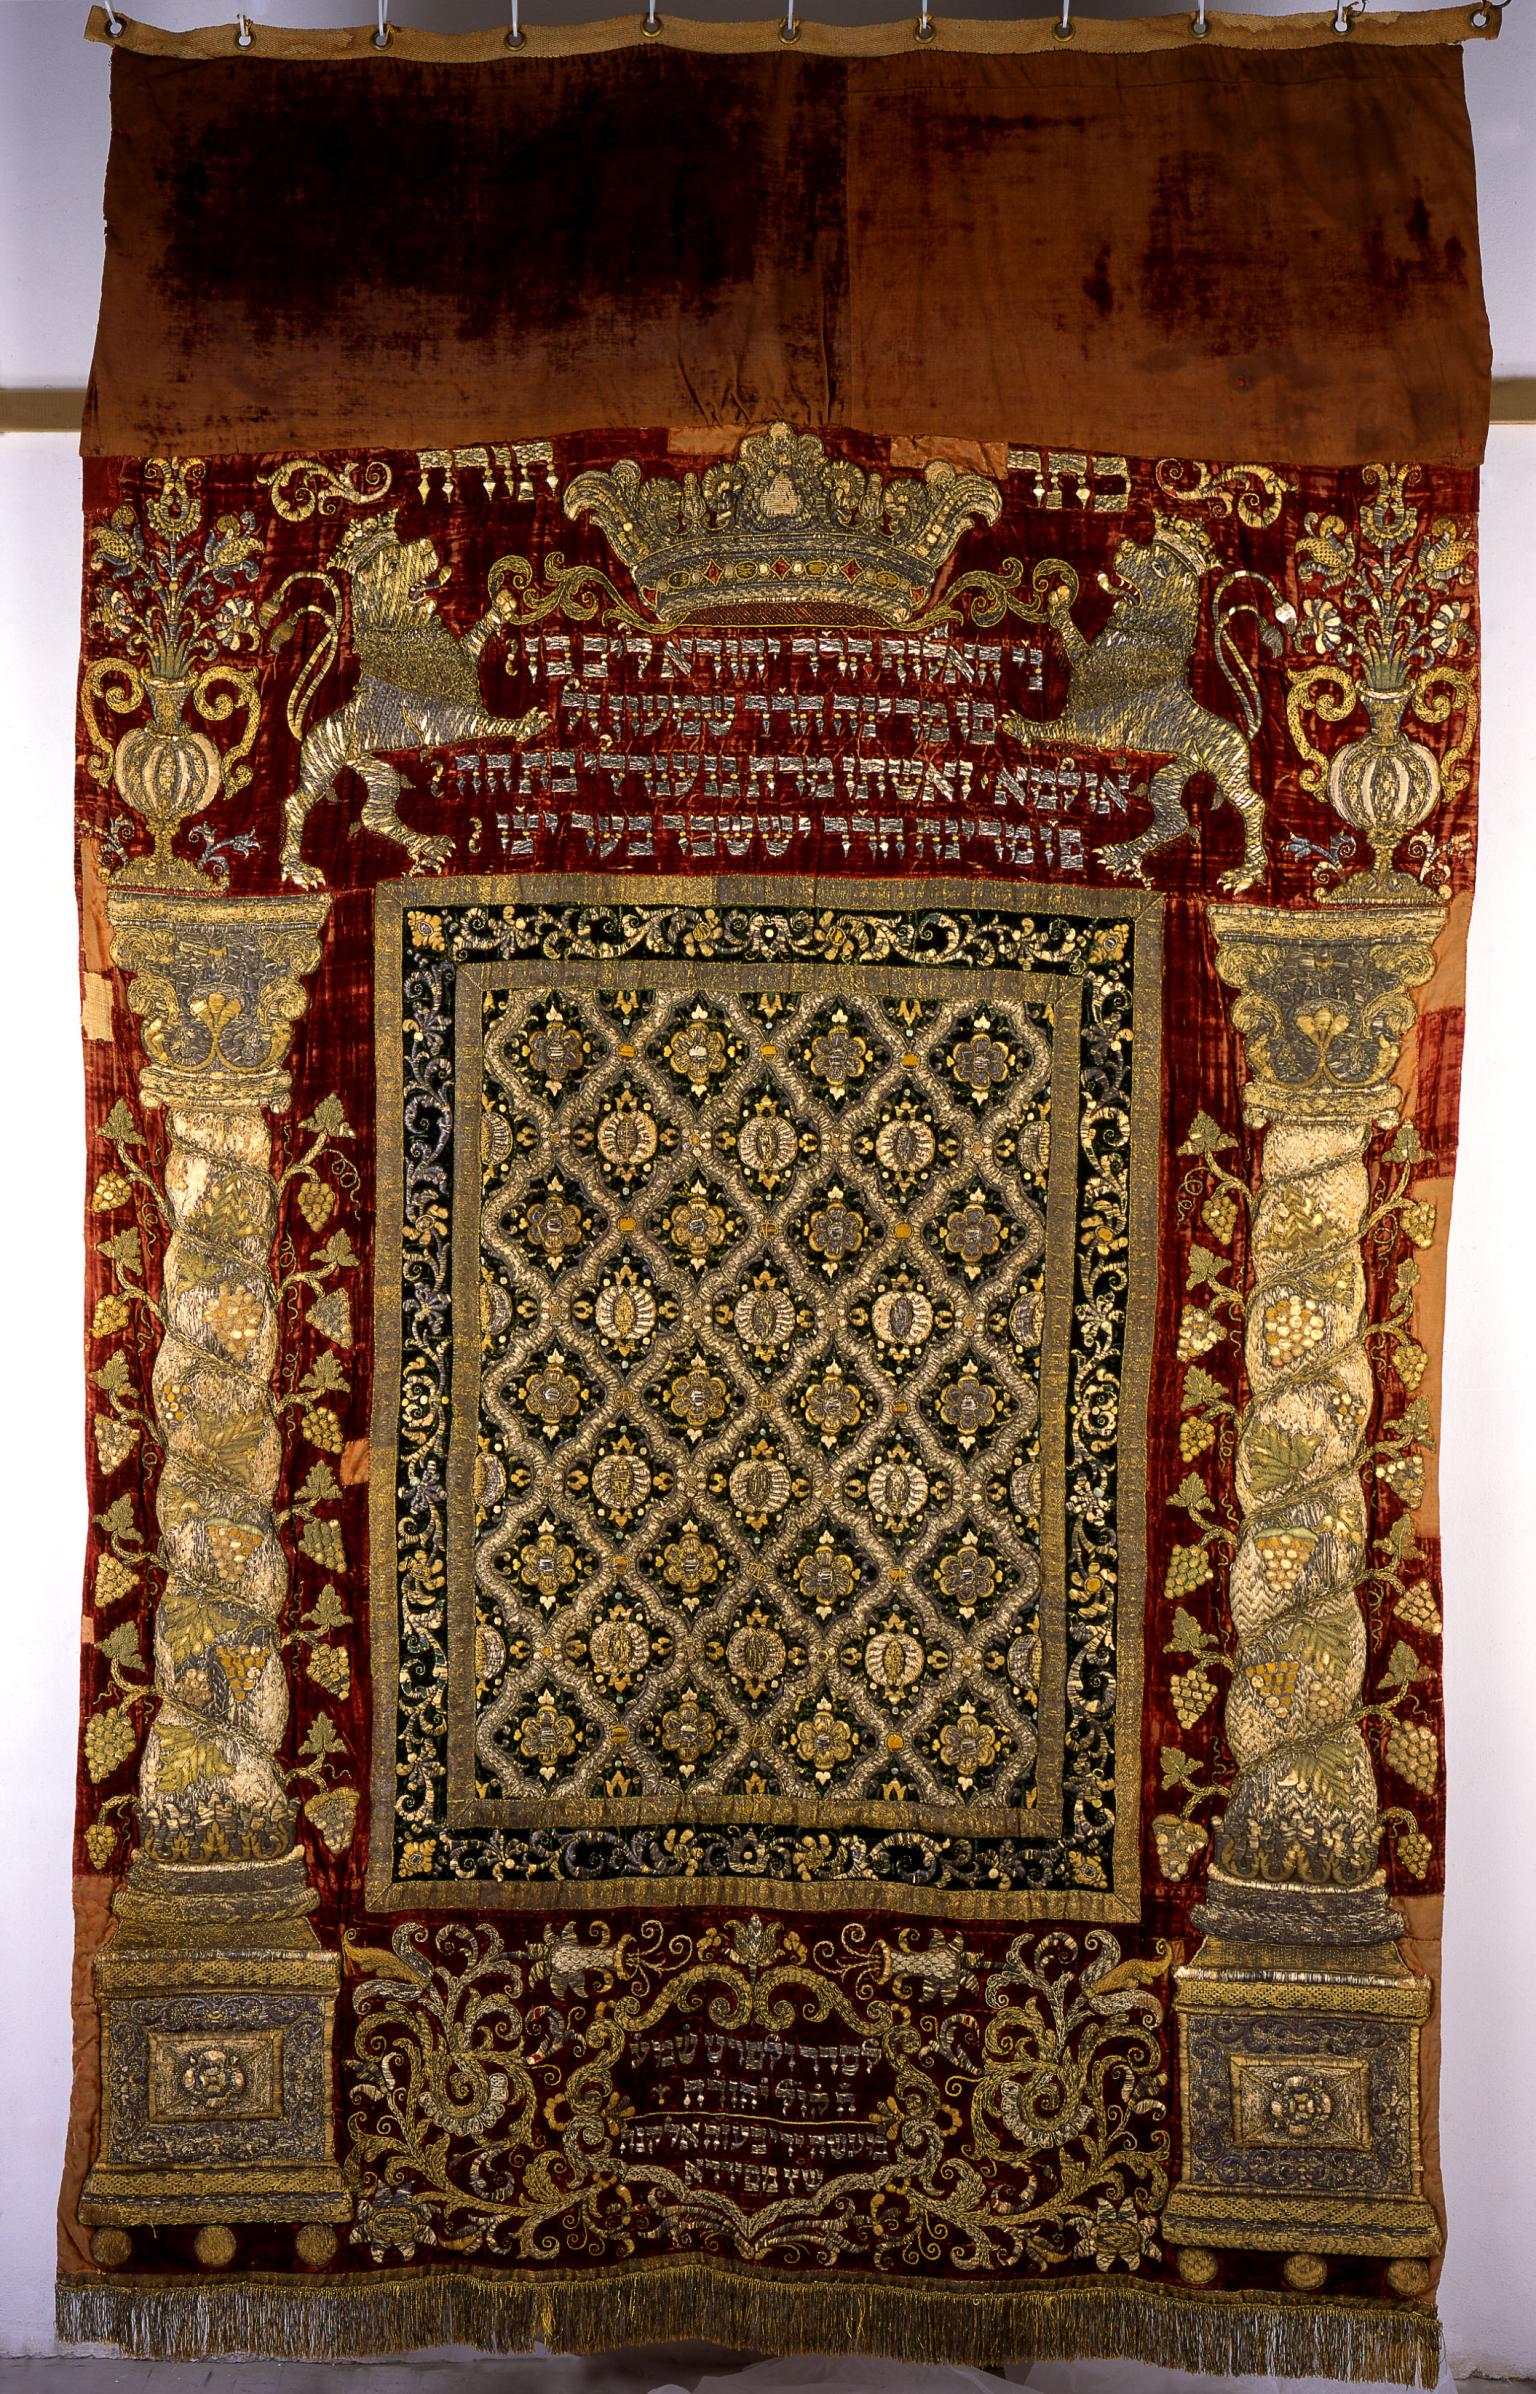 Cloth with embroidered columns on either side, pattern in the middle, and Hebrew text between two lions and crown on top.